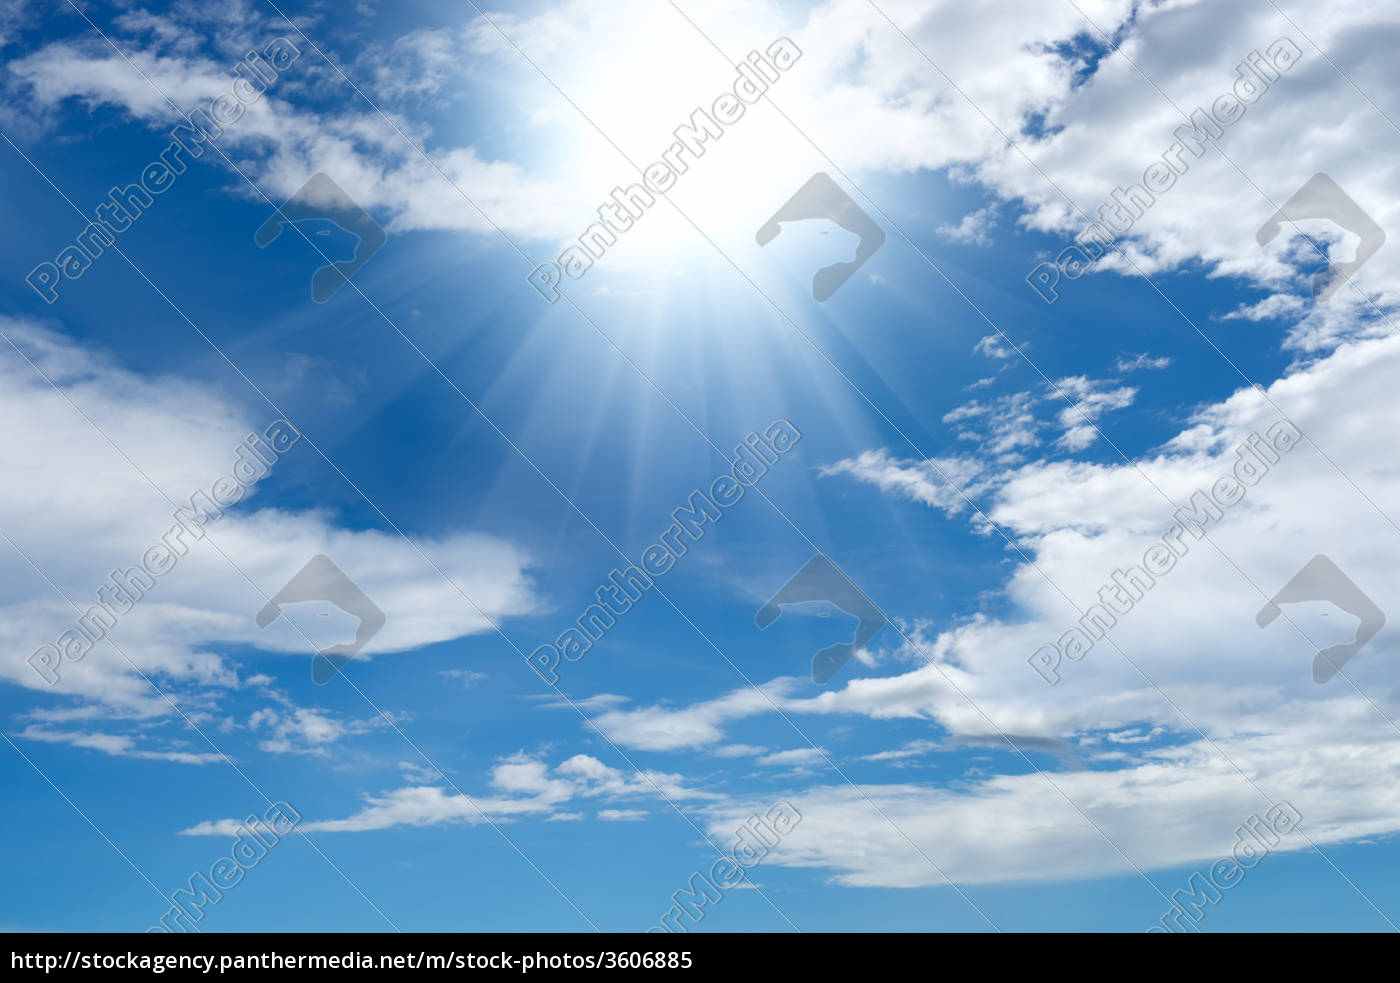 Bright Sun And Clouds Royalty Free Image Panthermedia Stock Agency